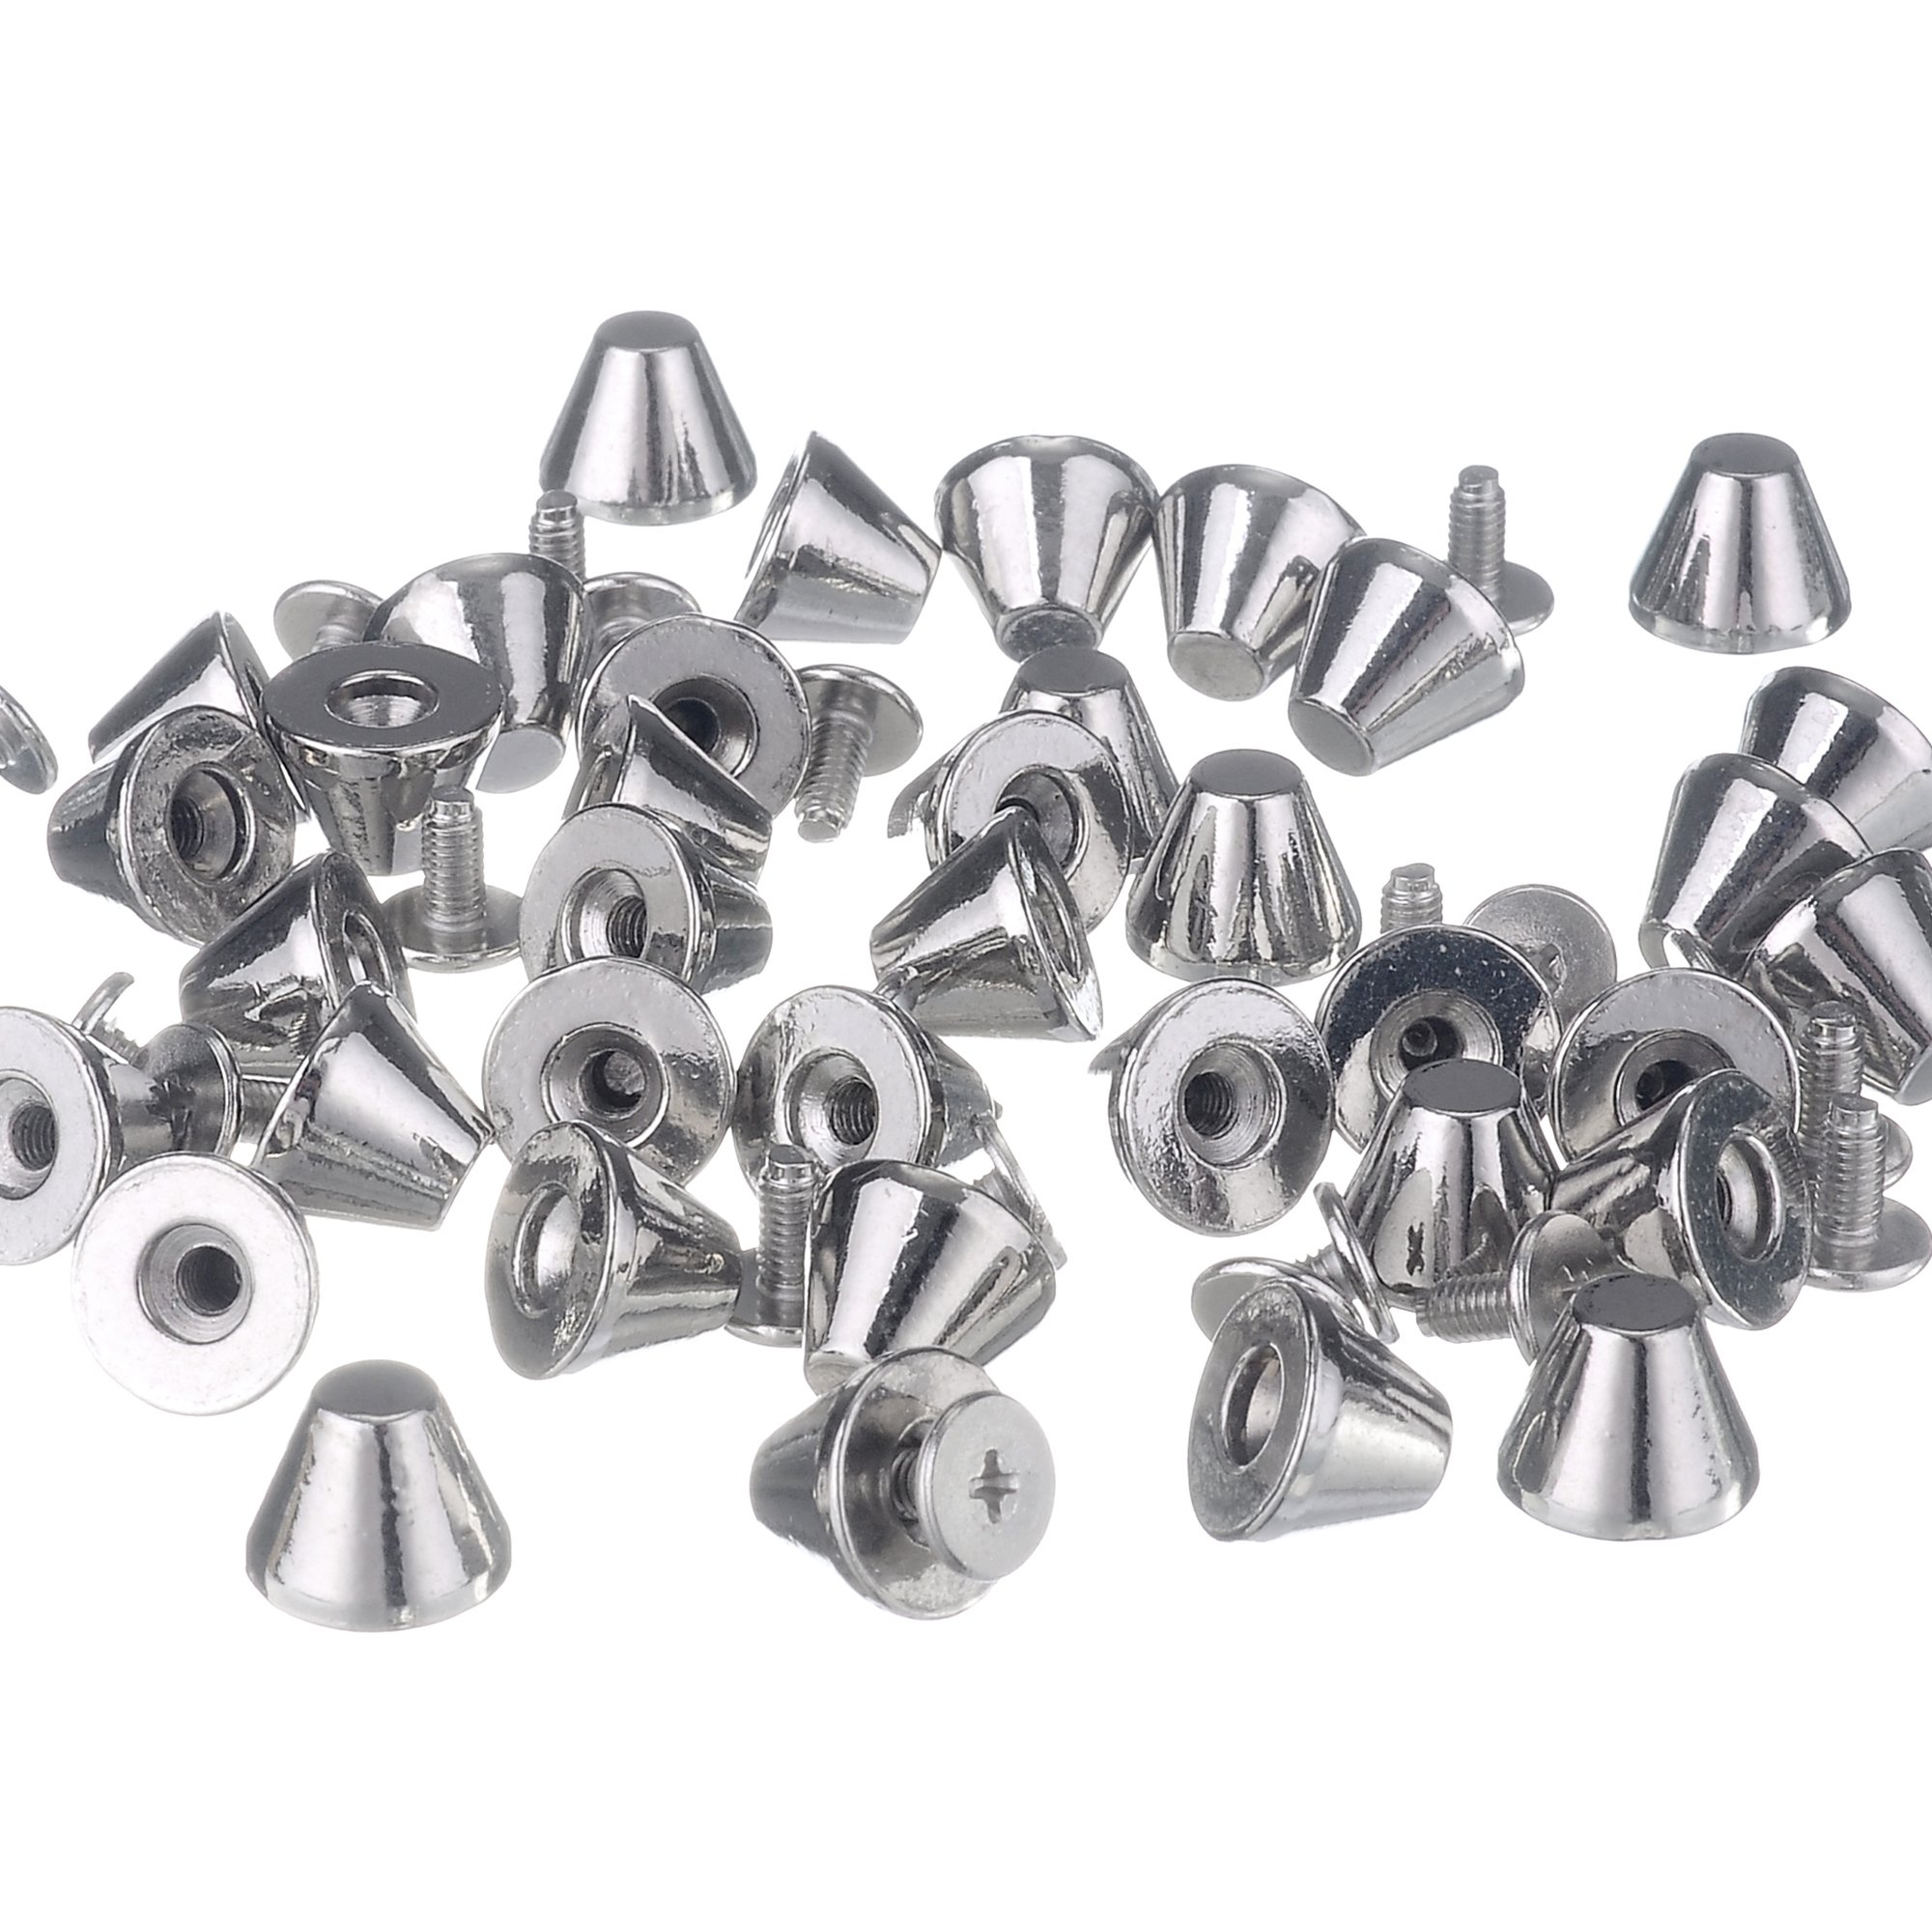 RUBYCA 100 Sets Silver Color 8MM Big Mushroom Studs and Spikes Metal Screw-Back Leather-Craft DIY 8mm